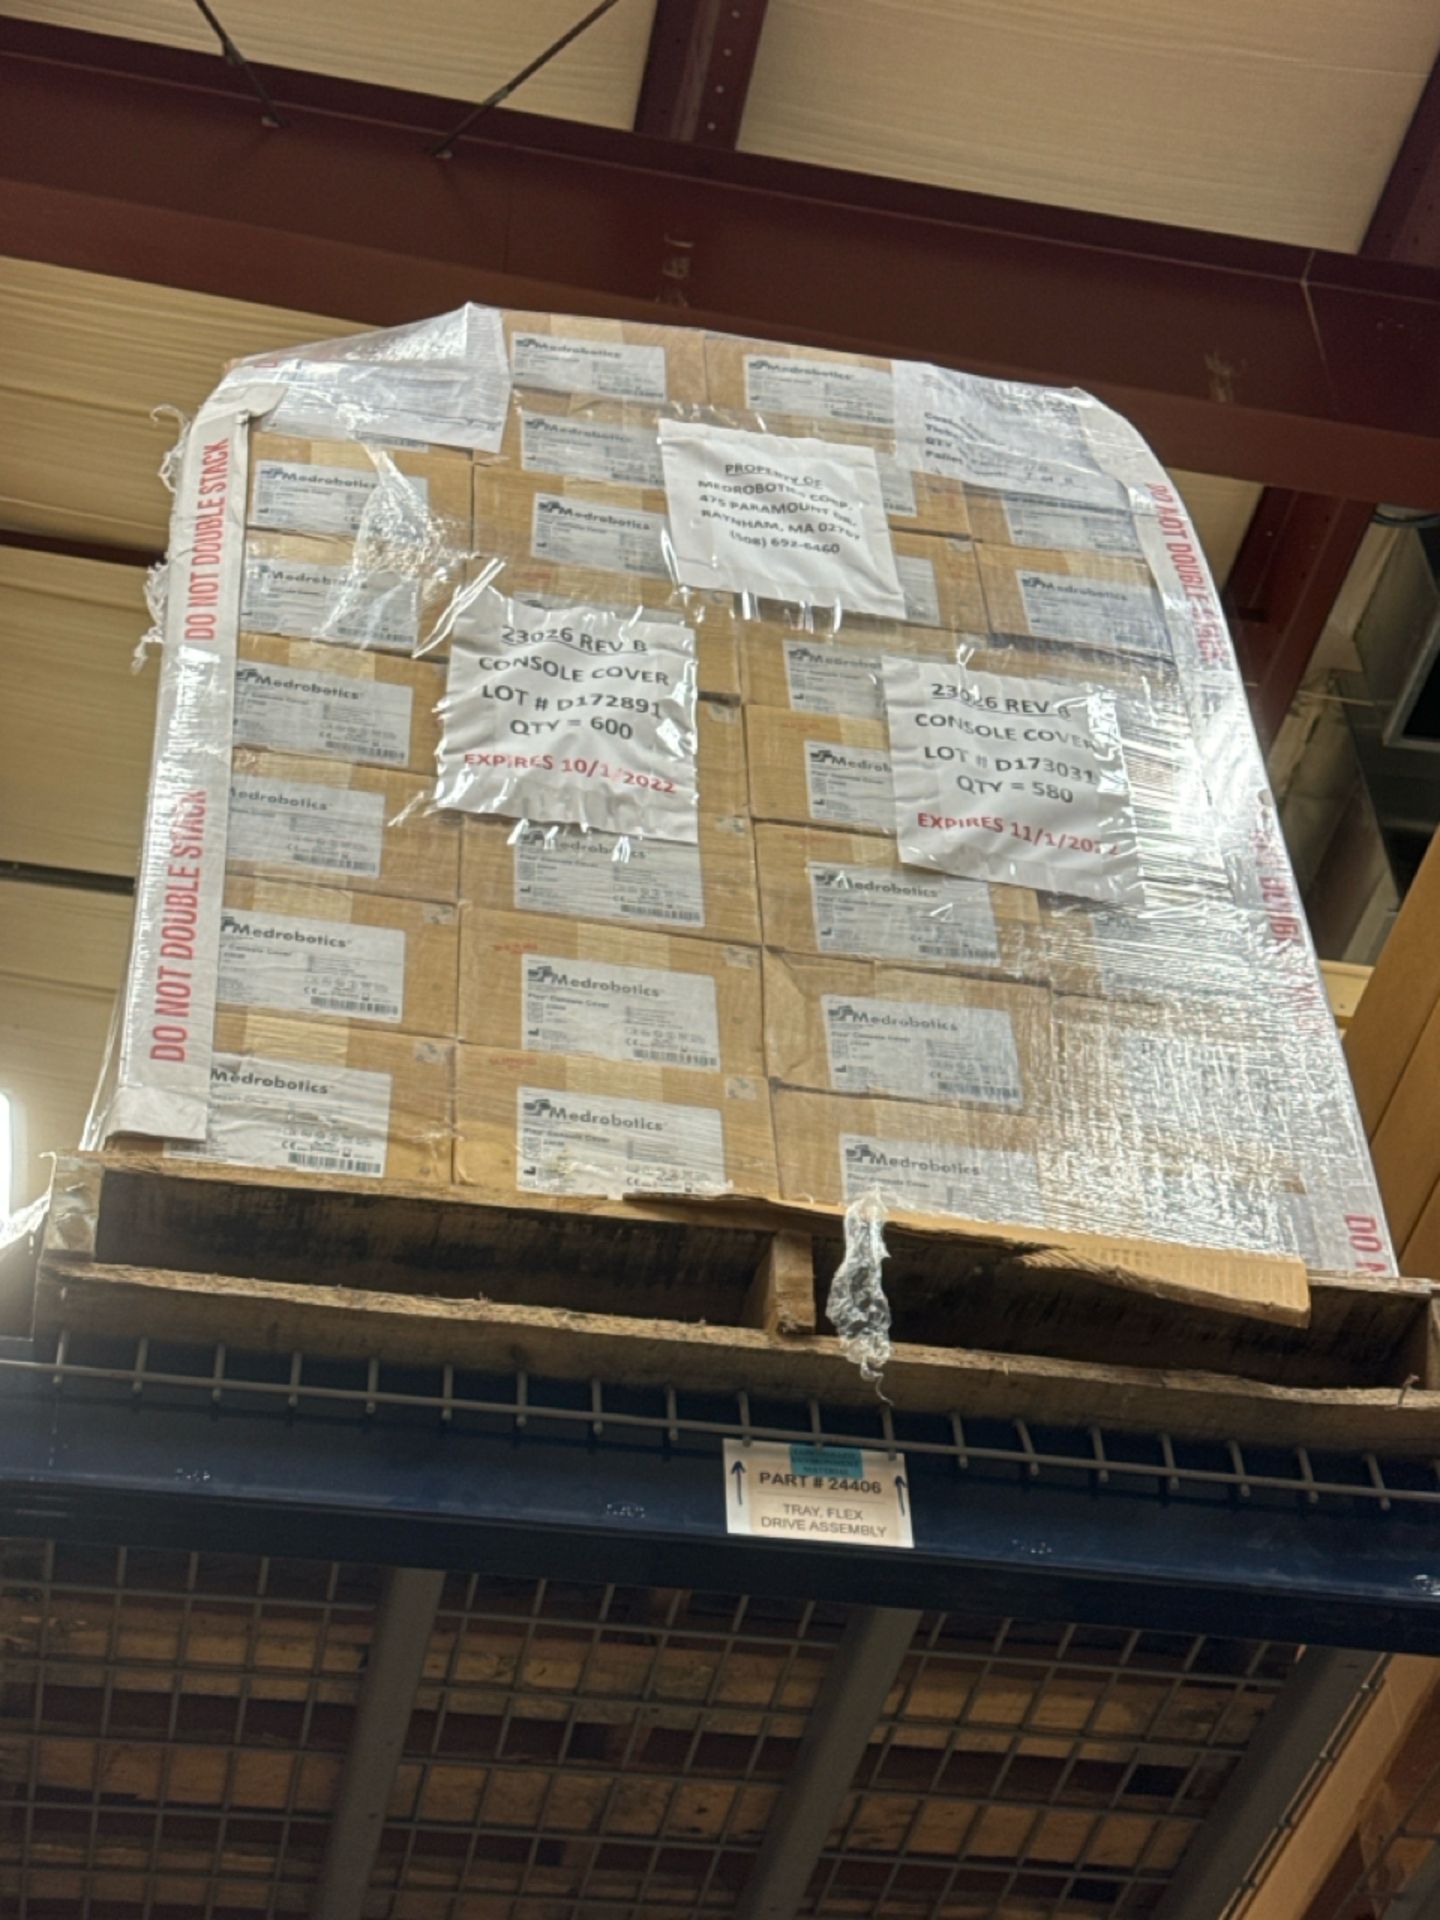 Contents of Center Pallet Racking - Image 27 of 68